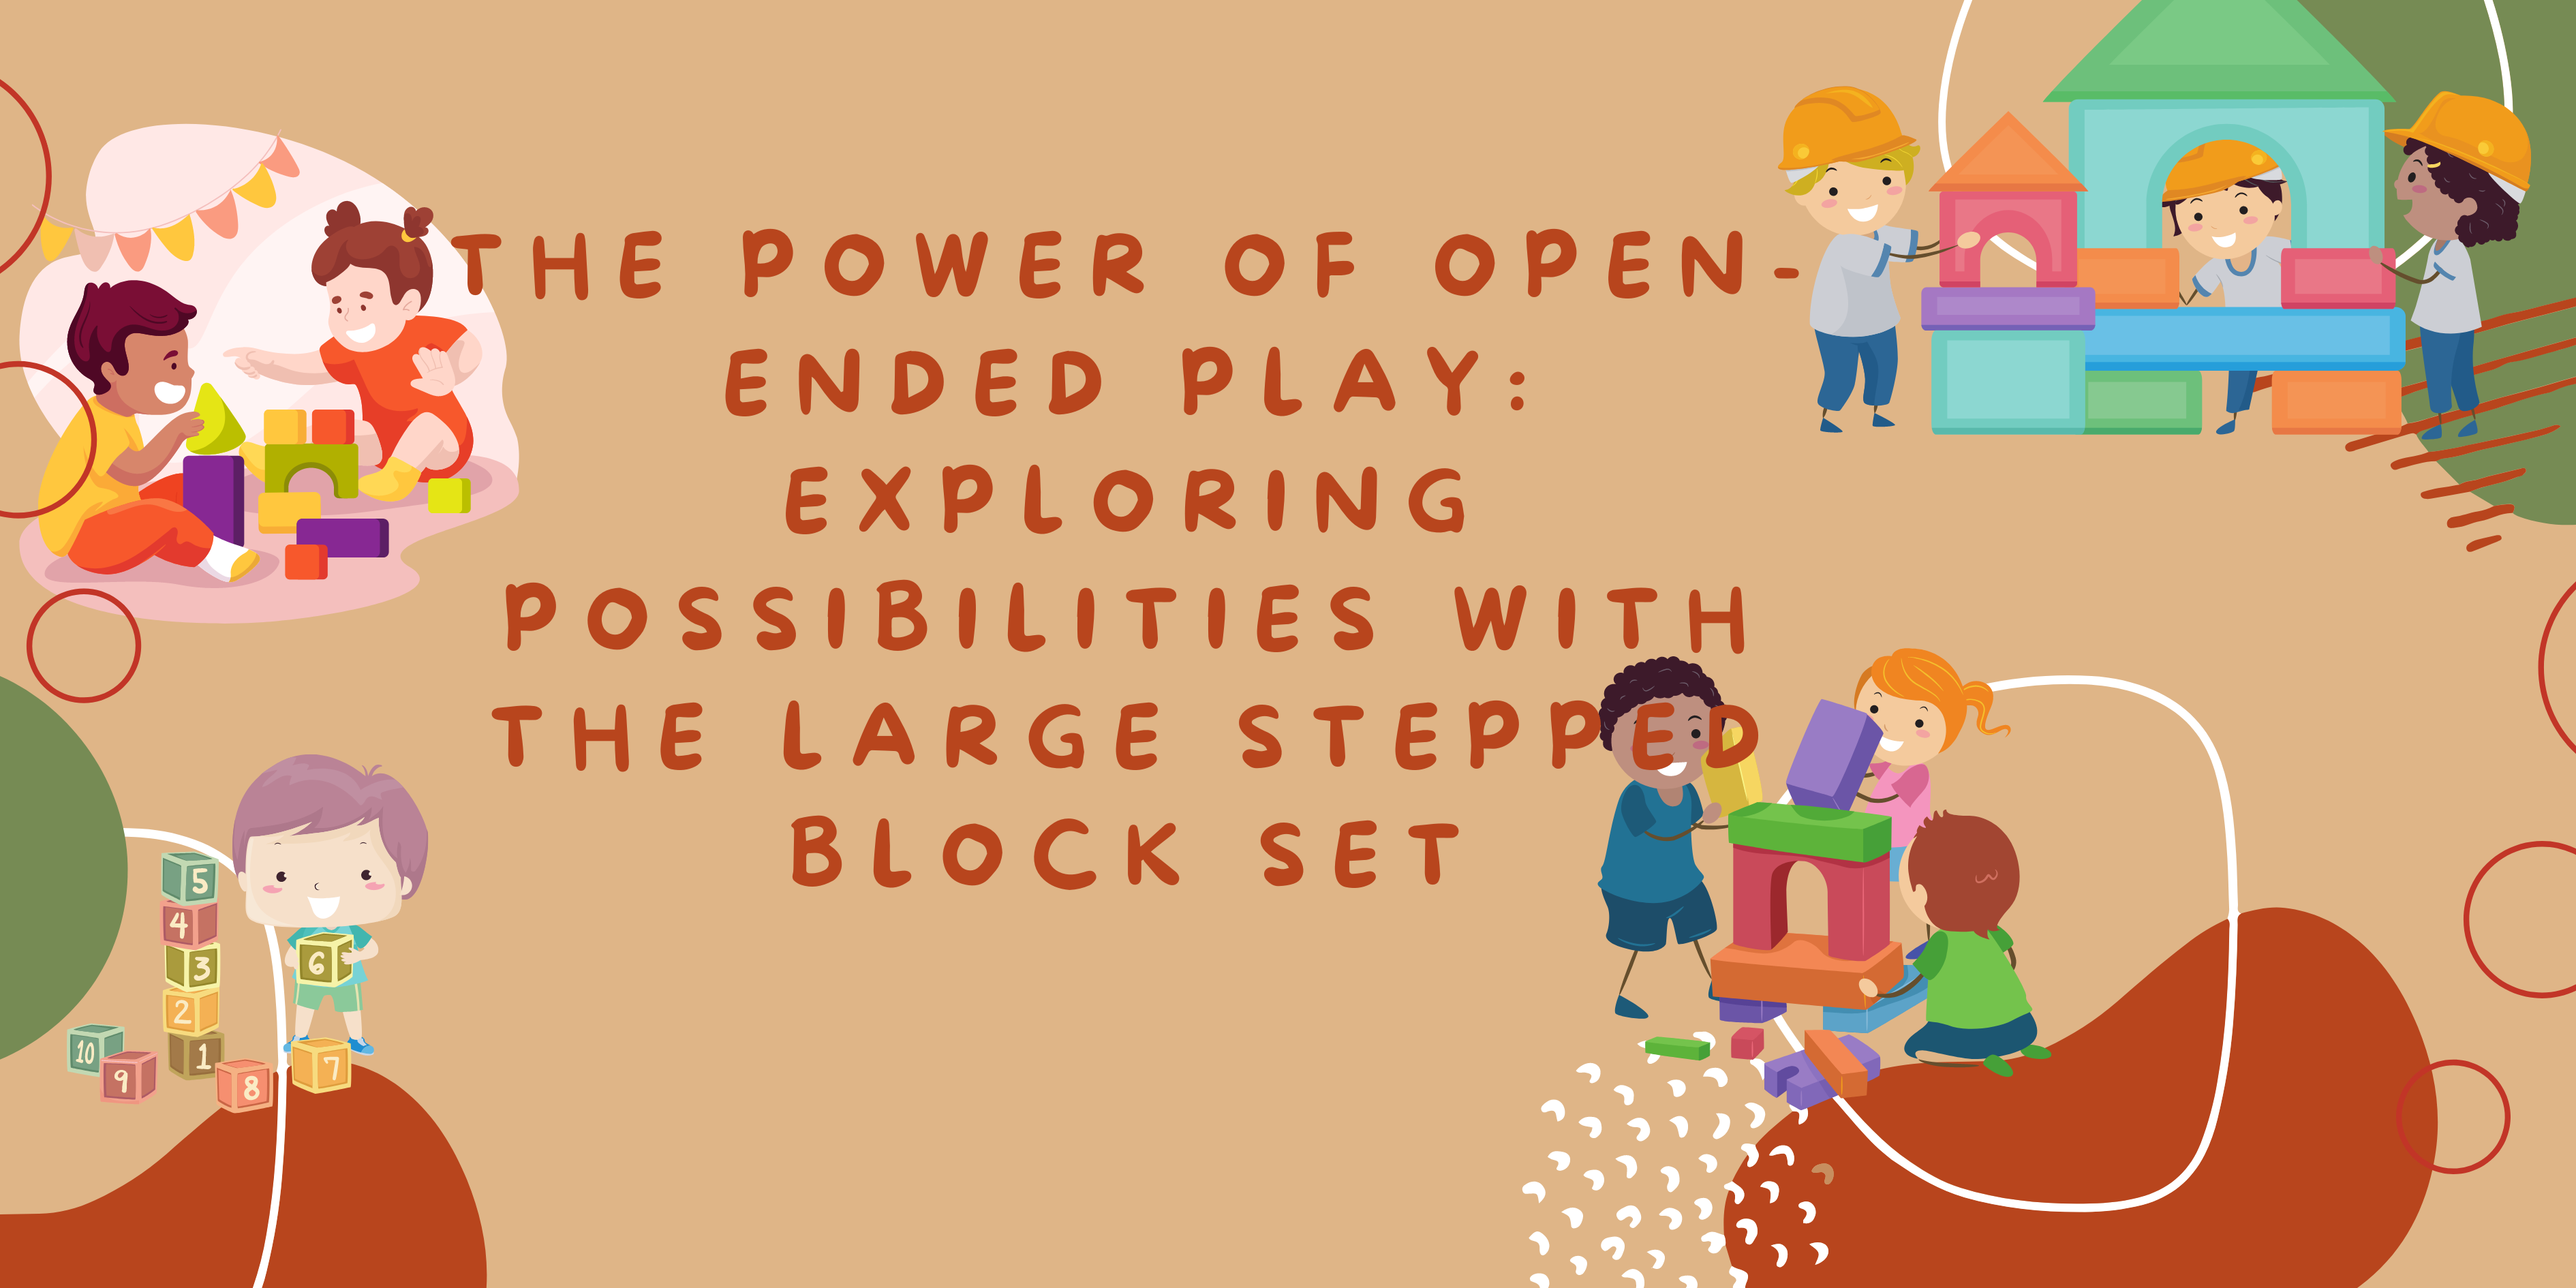 The Power of Open-Ended Play: Exploring Possibilities with the Large Stepped Block Set